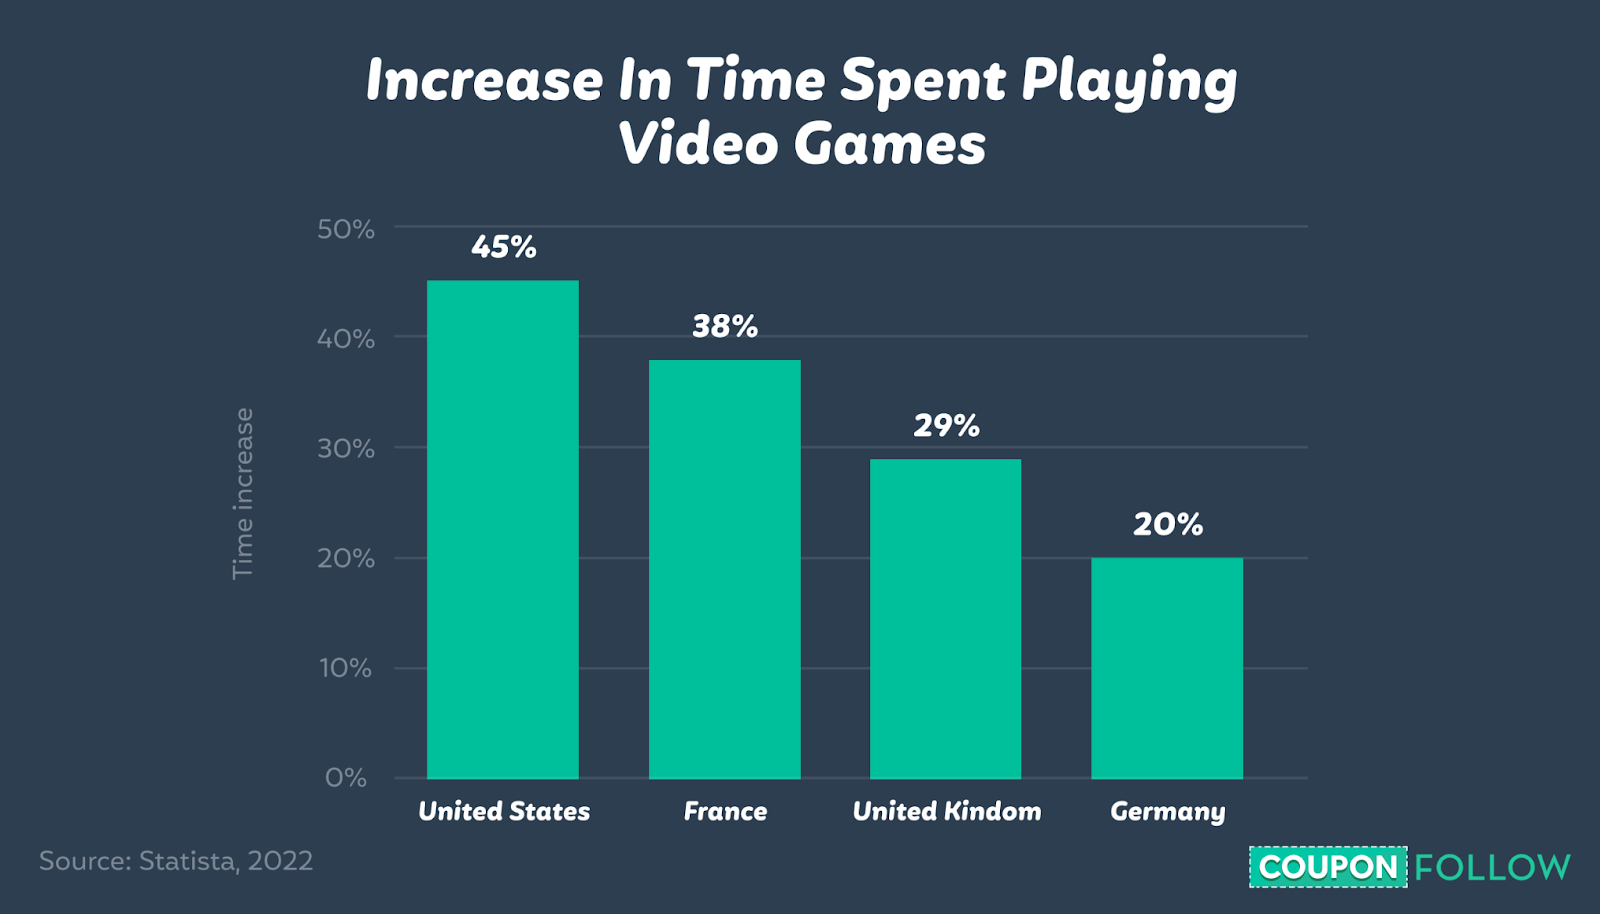 Bar chart showing increase in time spent playing video games